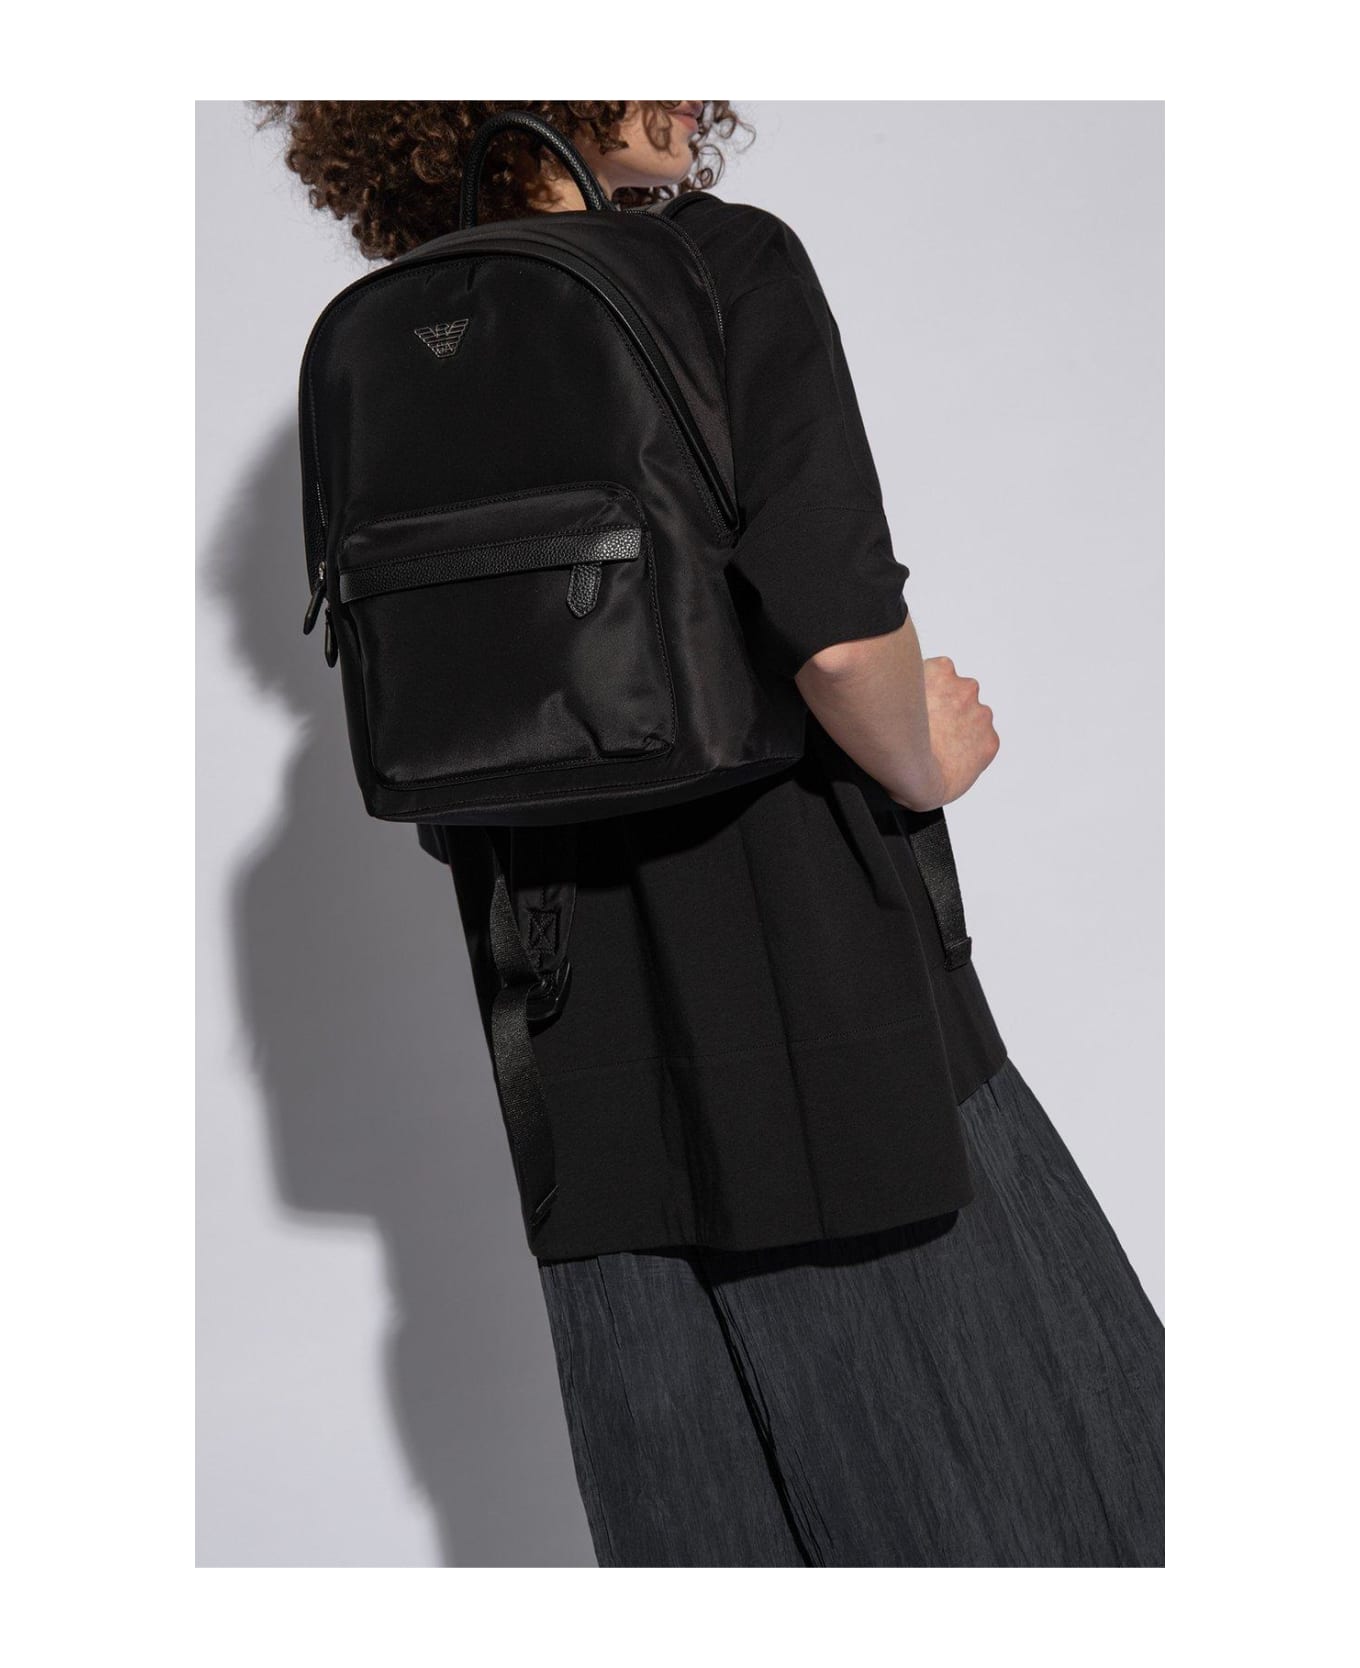 Emporio Armani Sustainable Collection Backpack - Black バックパック